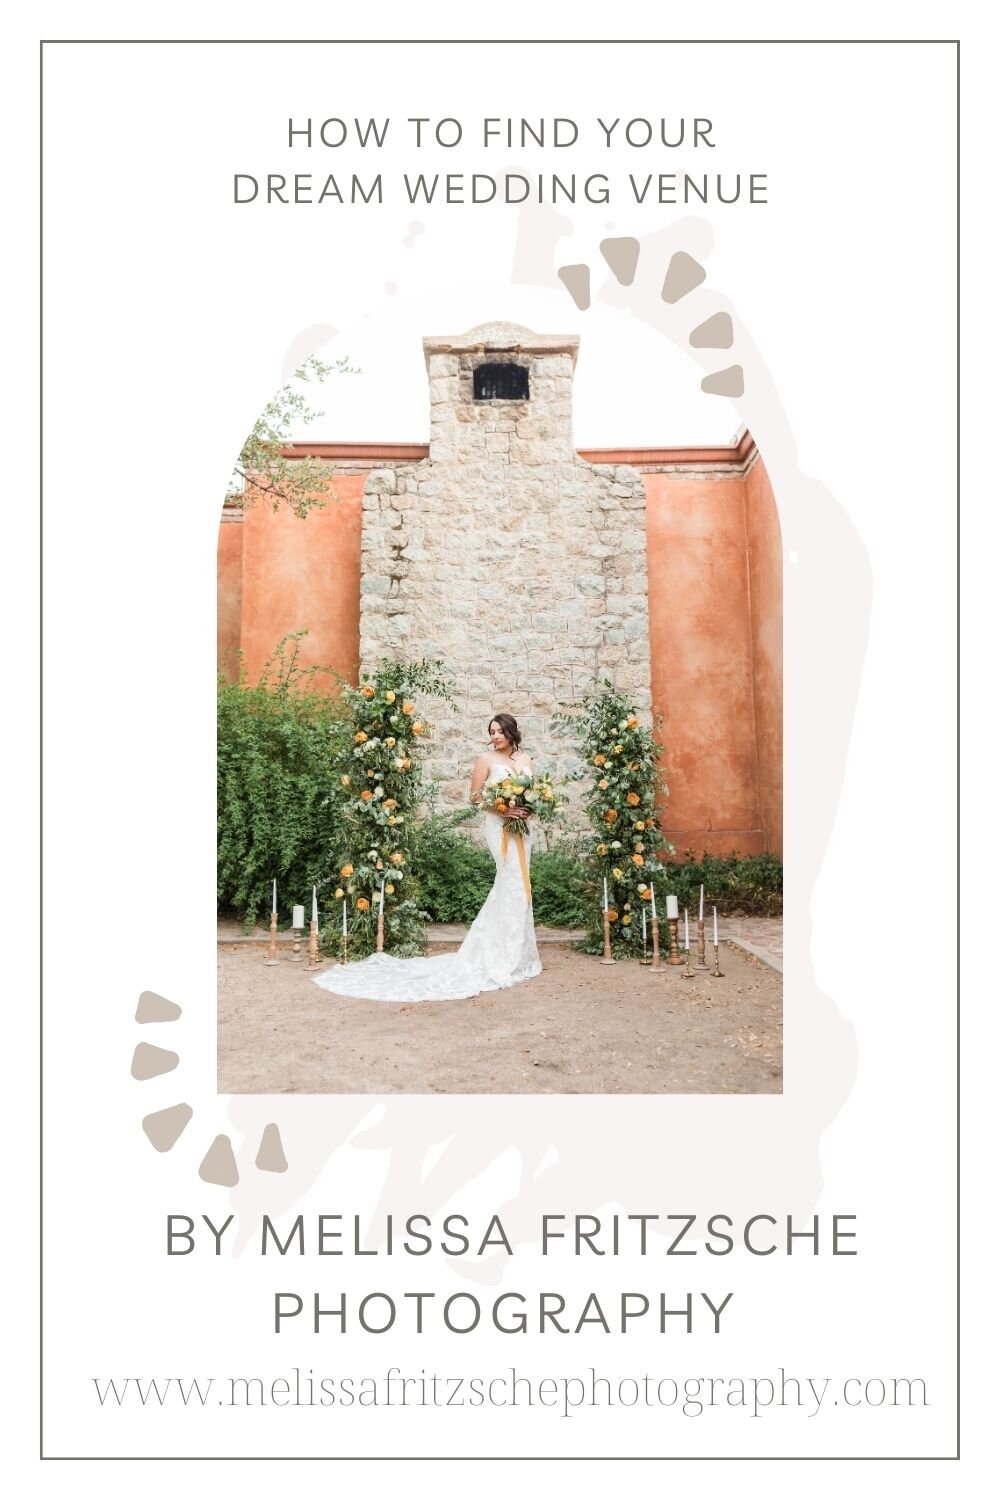 How to find your wedding venue in Tucson, Arizona